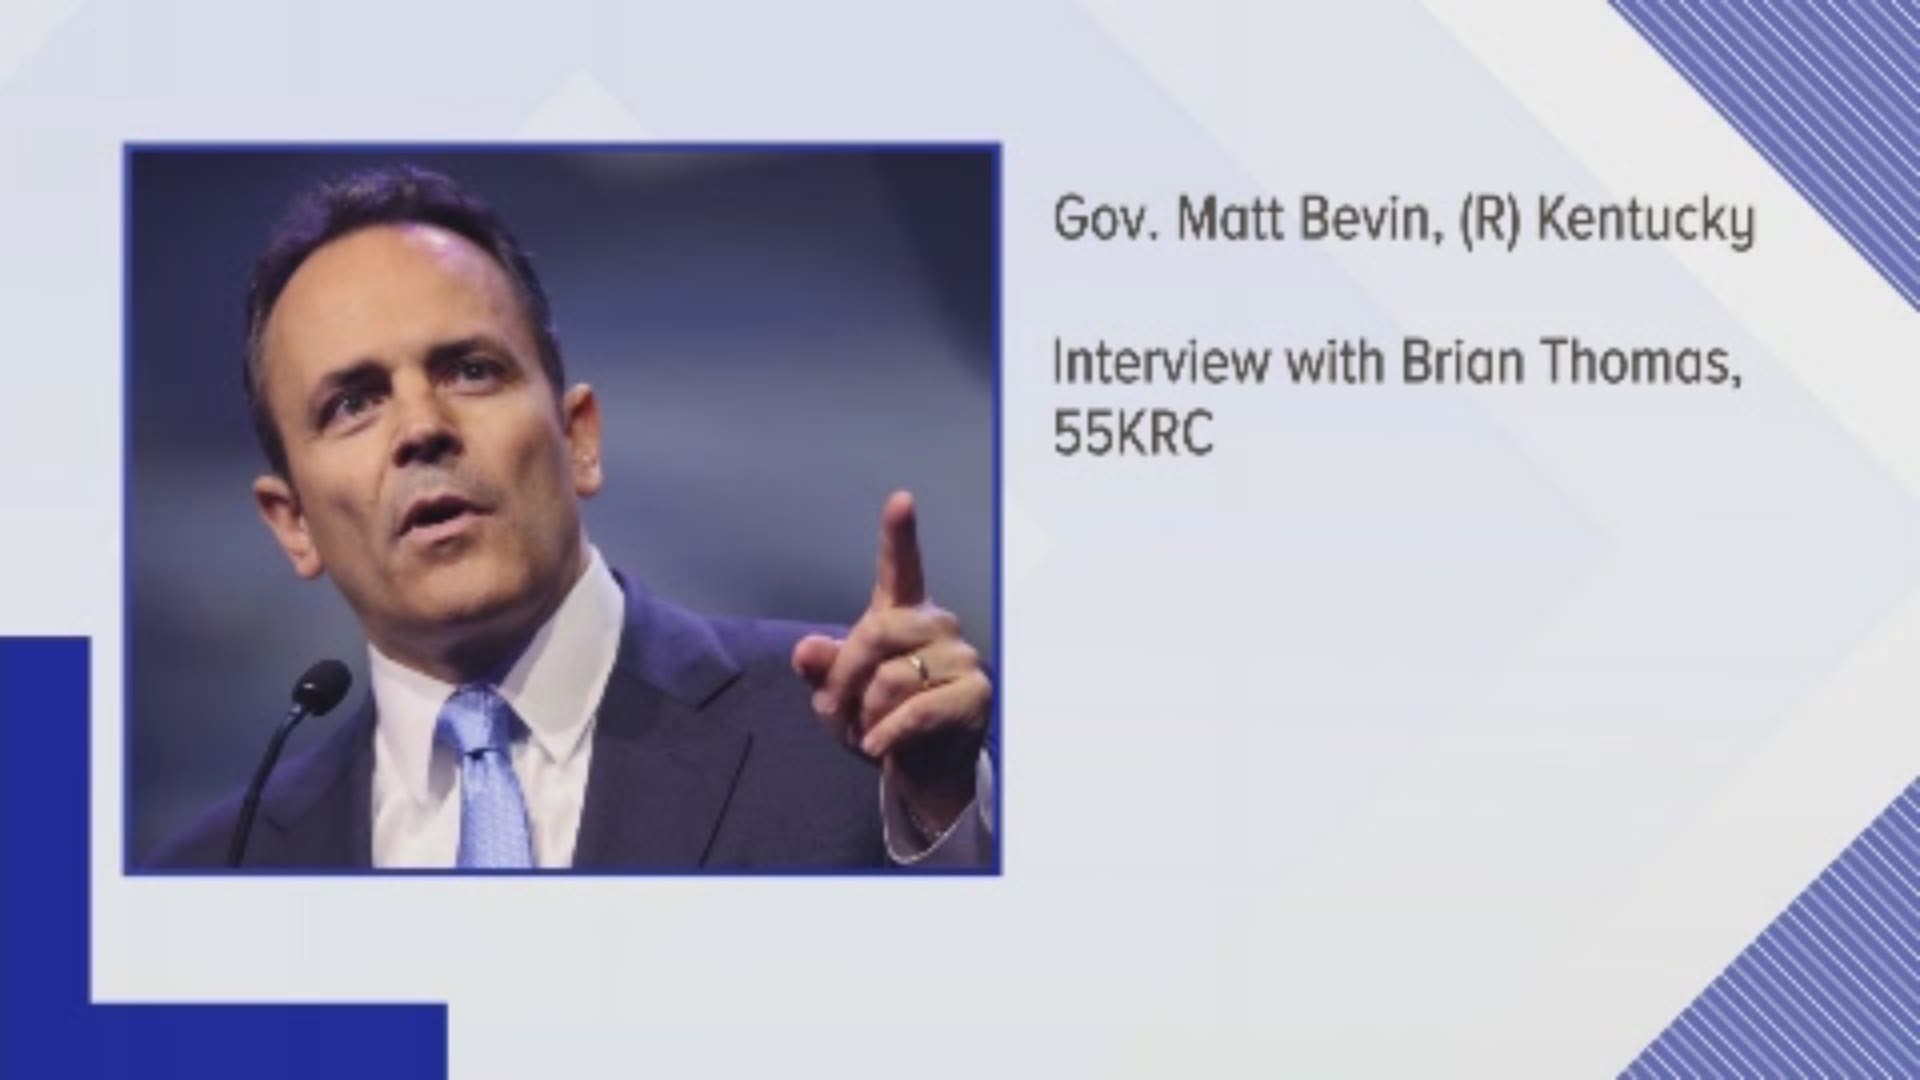 Matt Bevin responded to criticism after he compared those who are against his pension reform to drowning victims.